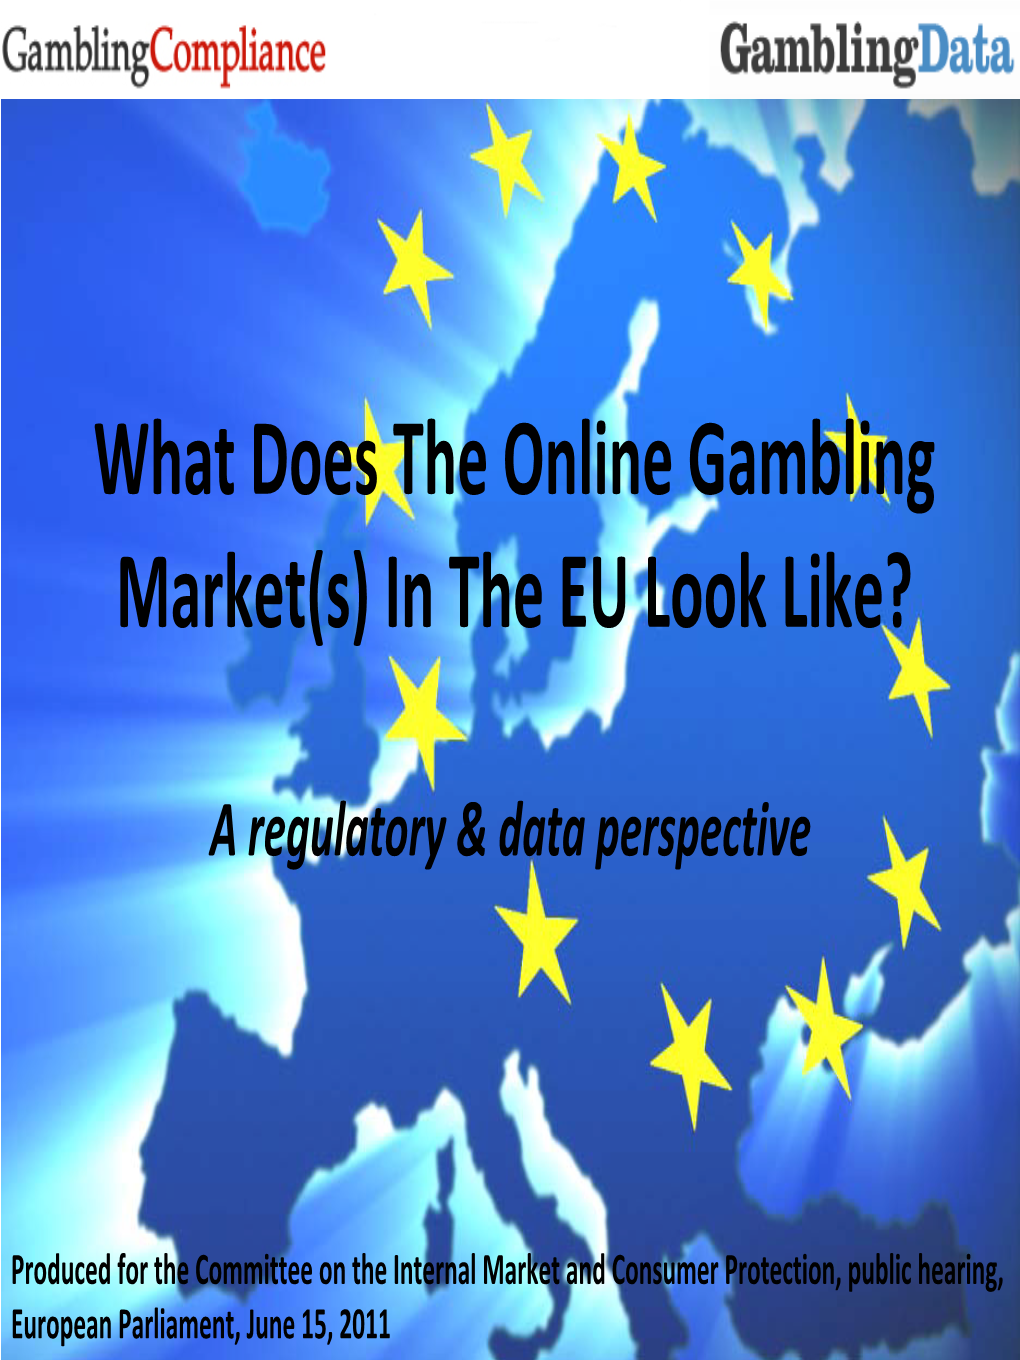 What Does the Online Gambling Market(S) in the EU Look Like?